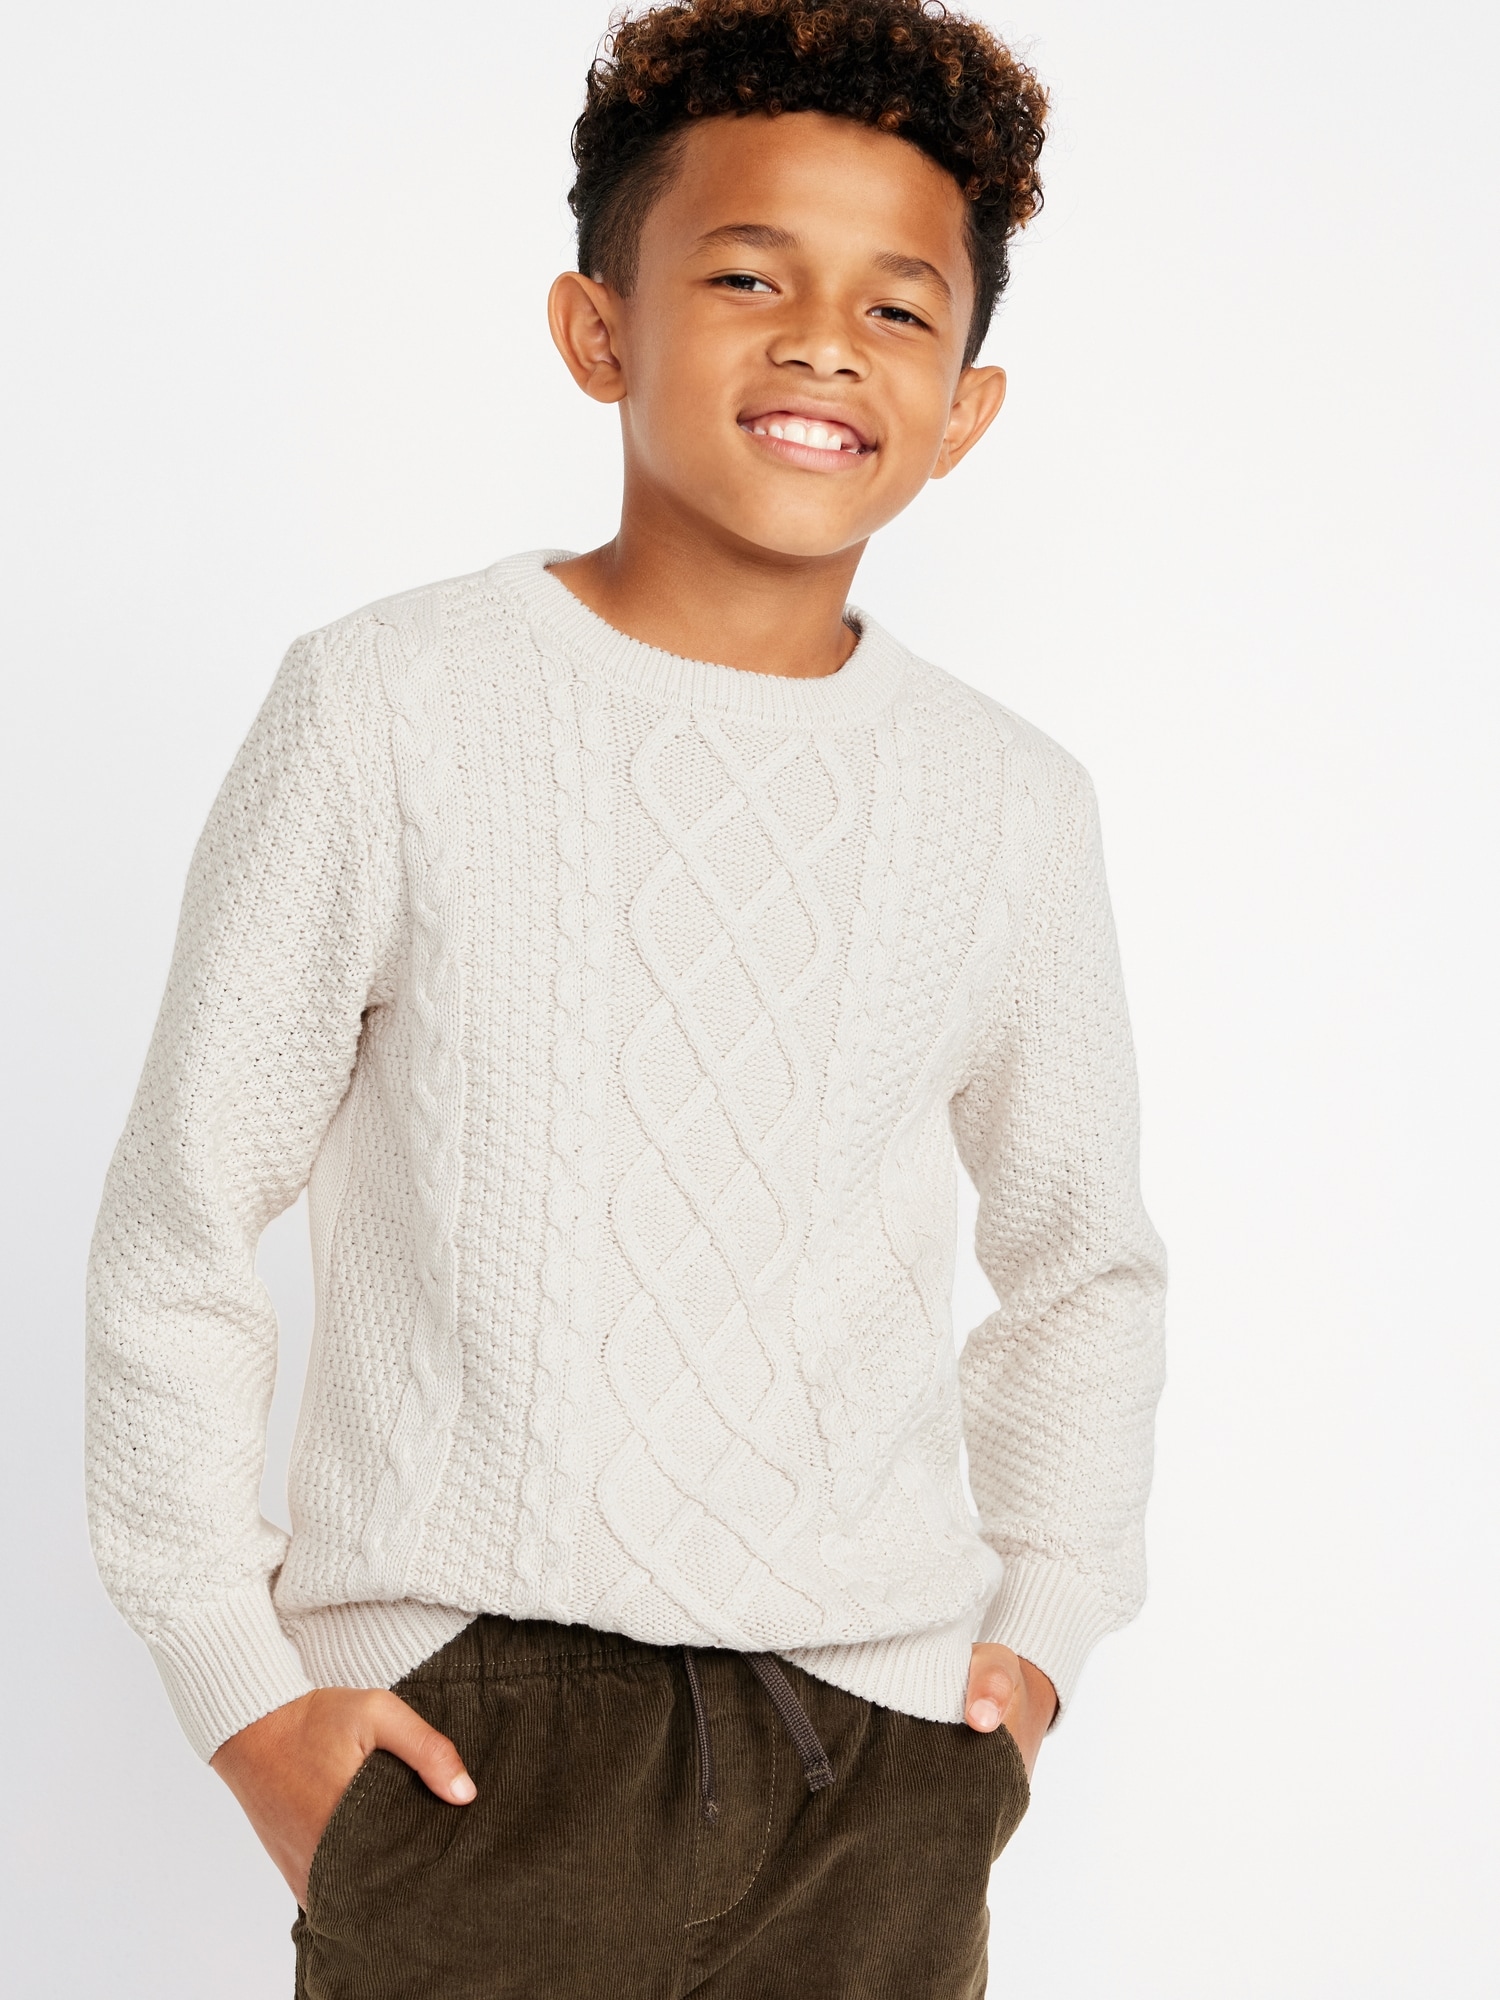 Long-Sleeve Cable-Knit Crew Neck Sweater for Boys | Old Navy